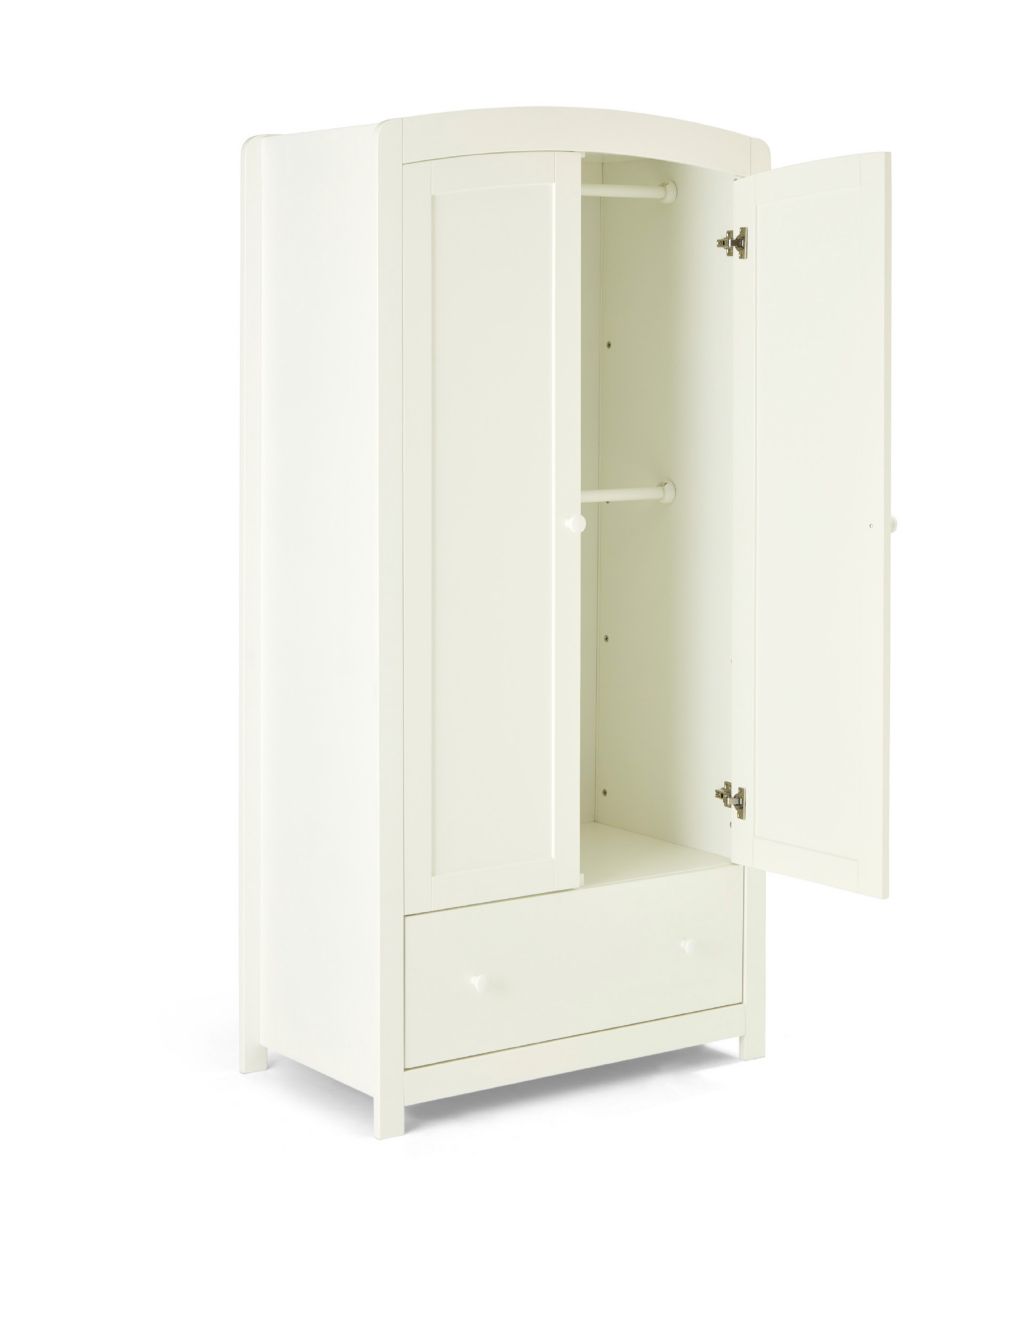 Mia 3 Piece Cotbed Range with Dresser and Wardrobe image 7